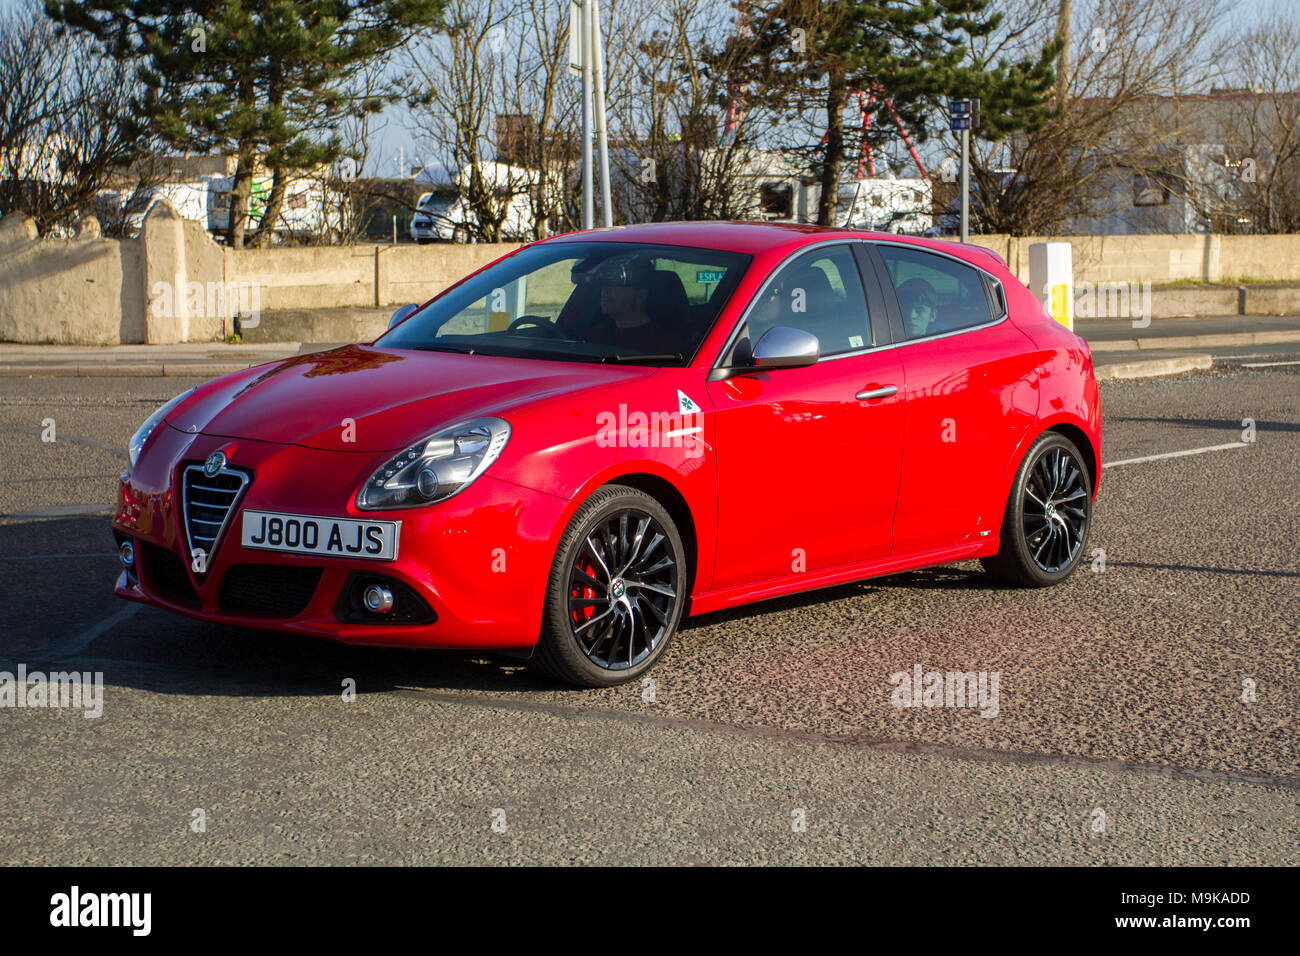 2013 red Alfa Romeo Giulietta Sportiva Multiair hatchback North-West Supercar event as cars and tourists arrive in the coastal resort on a warm spring day. SuperCars are bumper to bumper